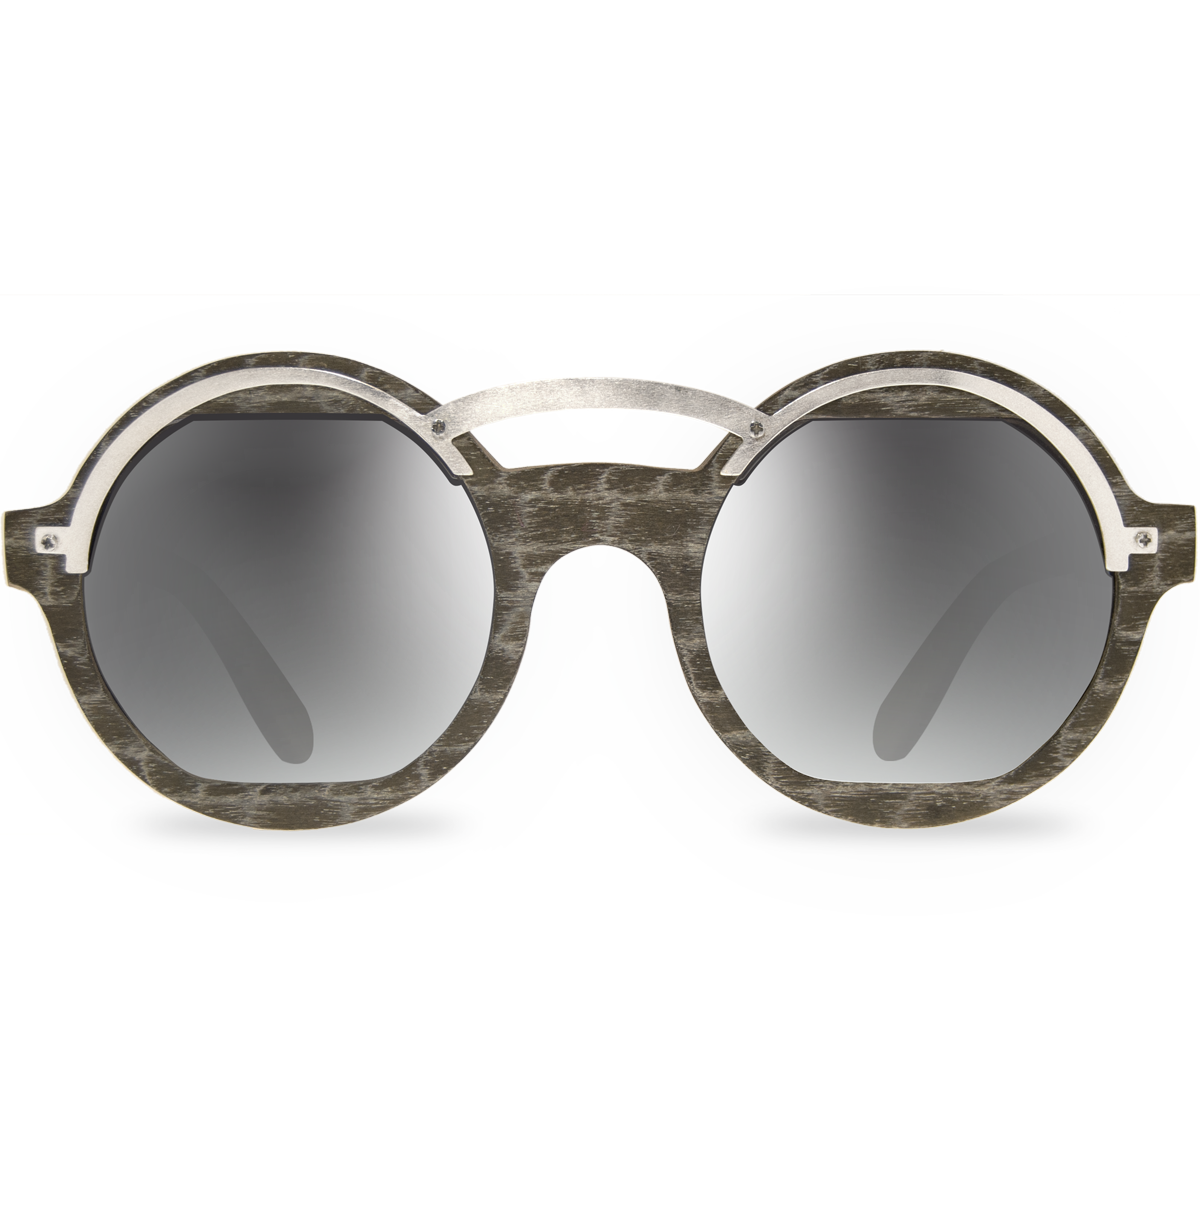 Coated Goggles Sunglasses Download Free Image Clipart